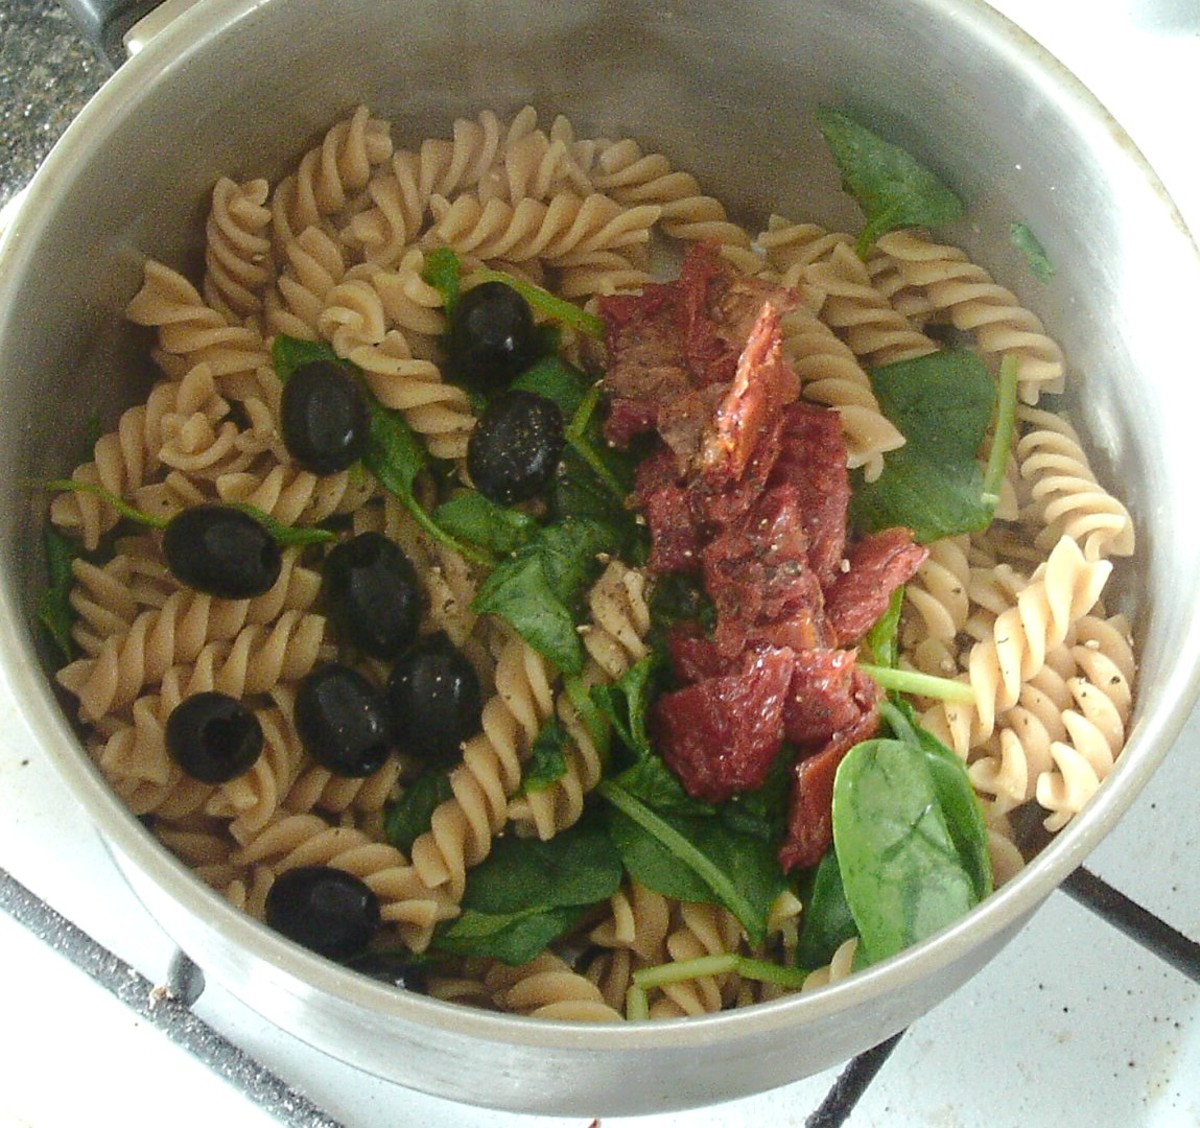 Sun-dried tomatoes and black olives are added to the pasta